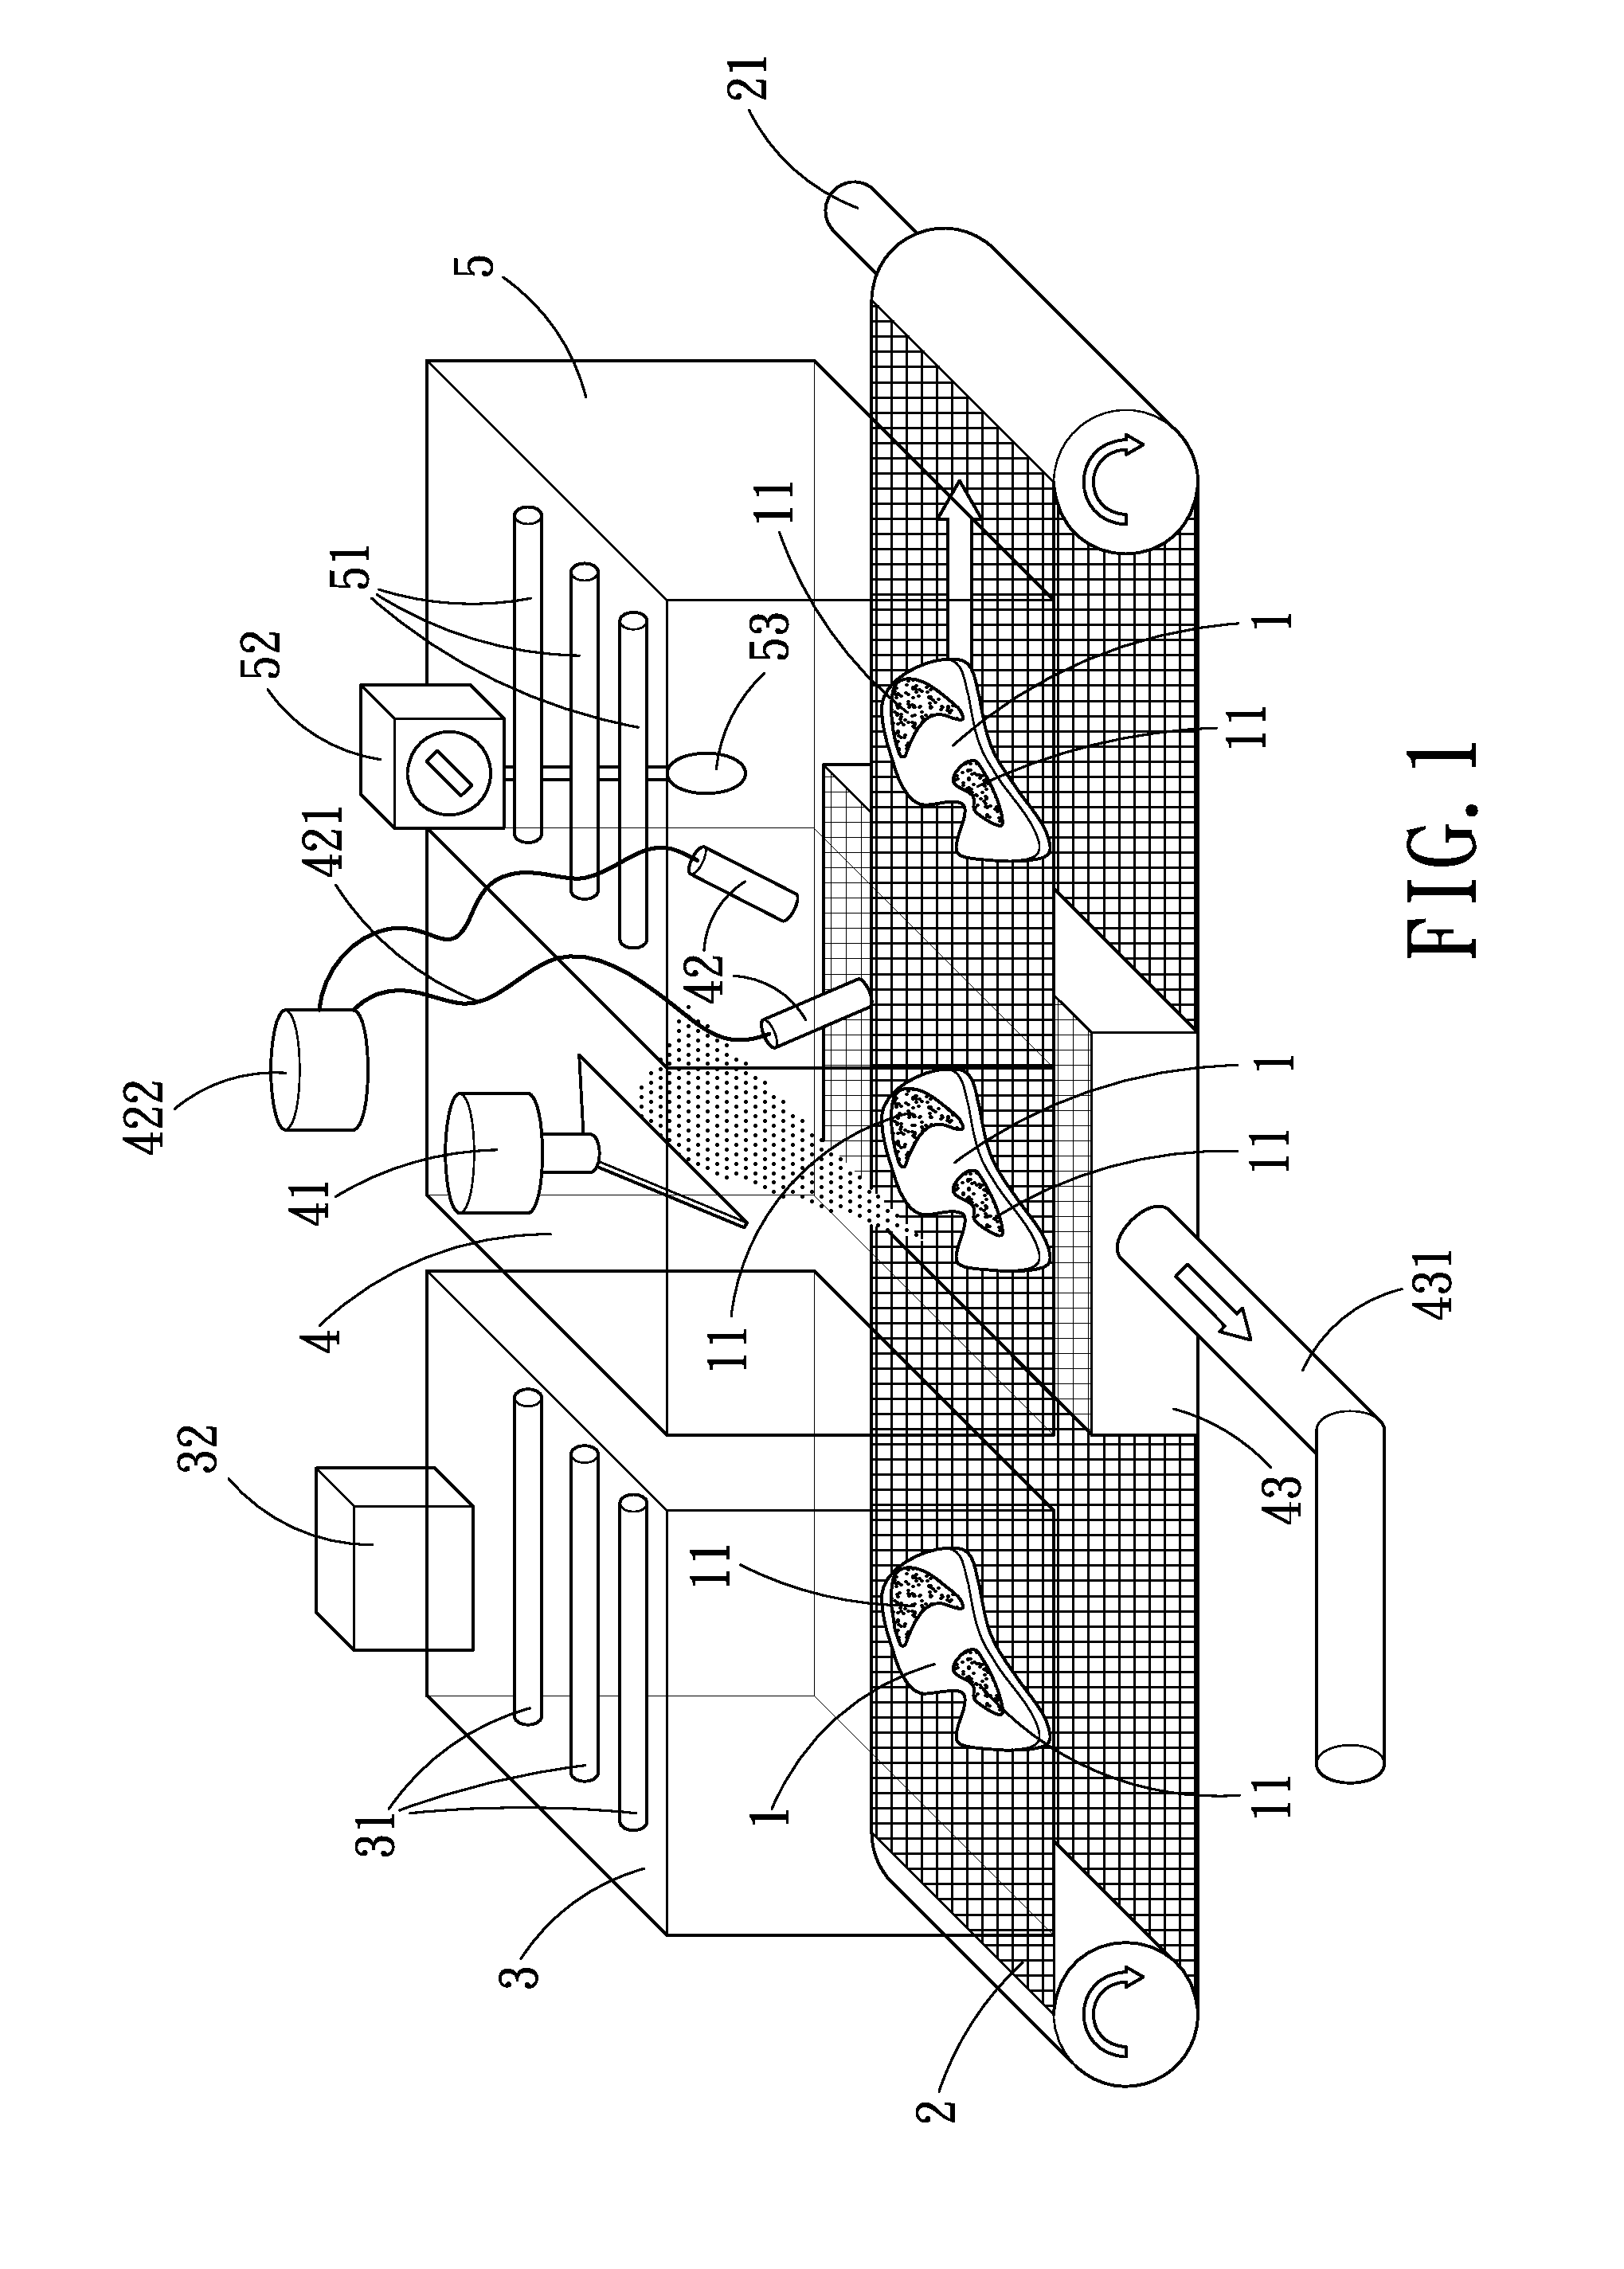 Method for Applying Hot Melt Adhesive Powder onto a Shoe or Sole Part